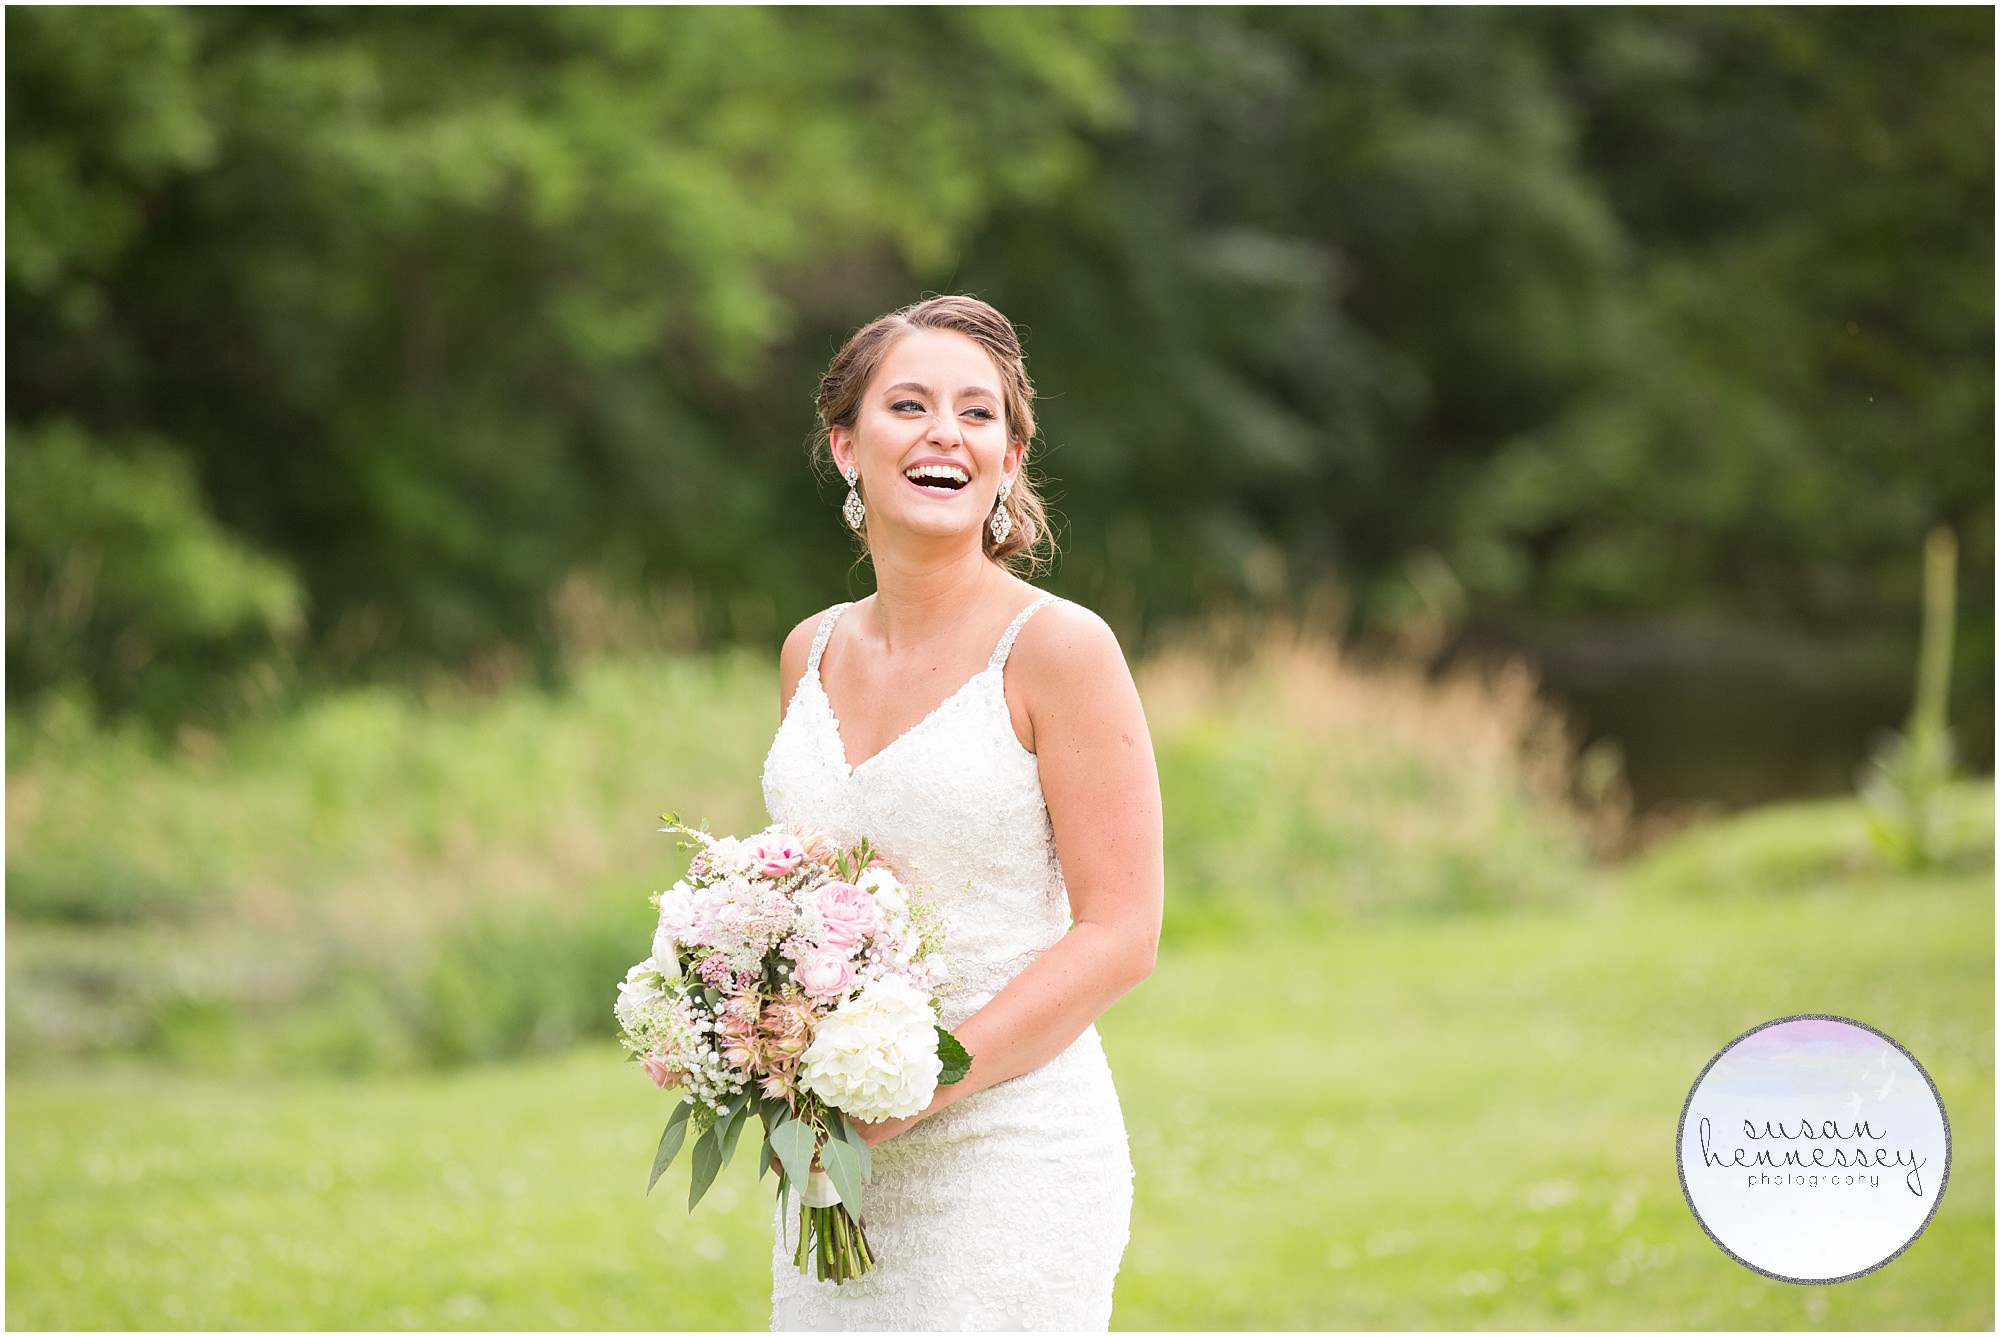 beautiful and happy bride on her wedding day.